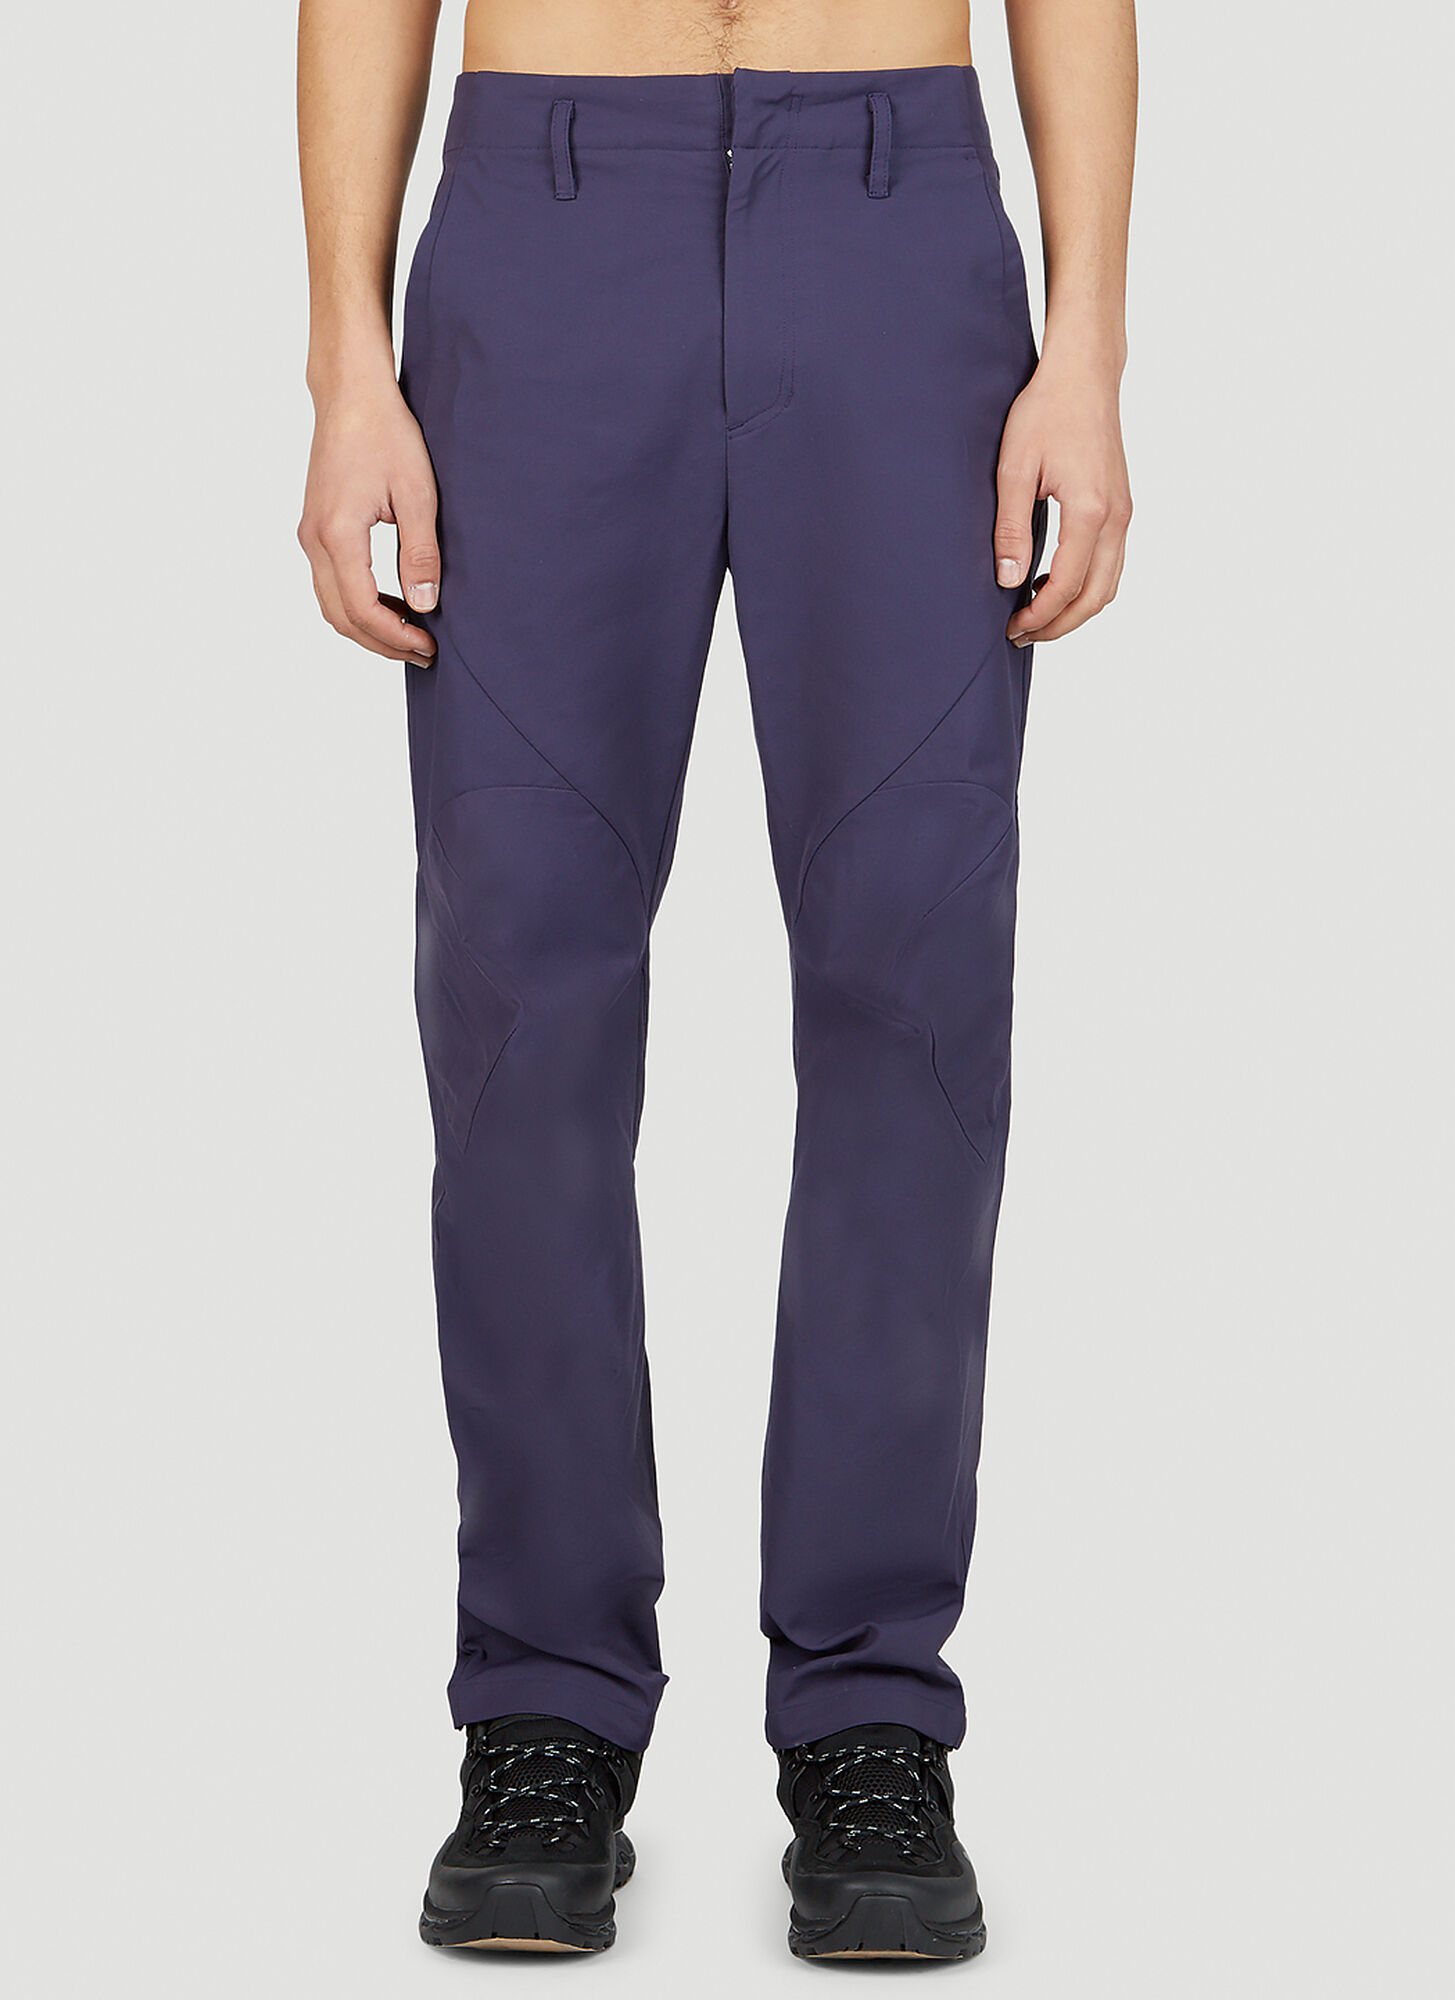 Post Archive Faction (paf) 5.0 Right Pants In Purple